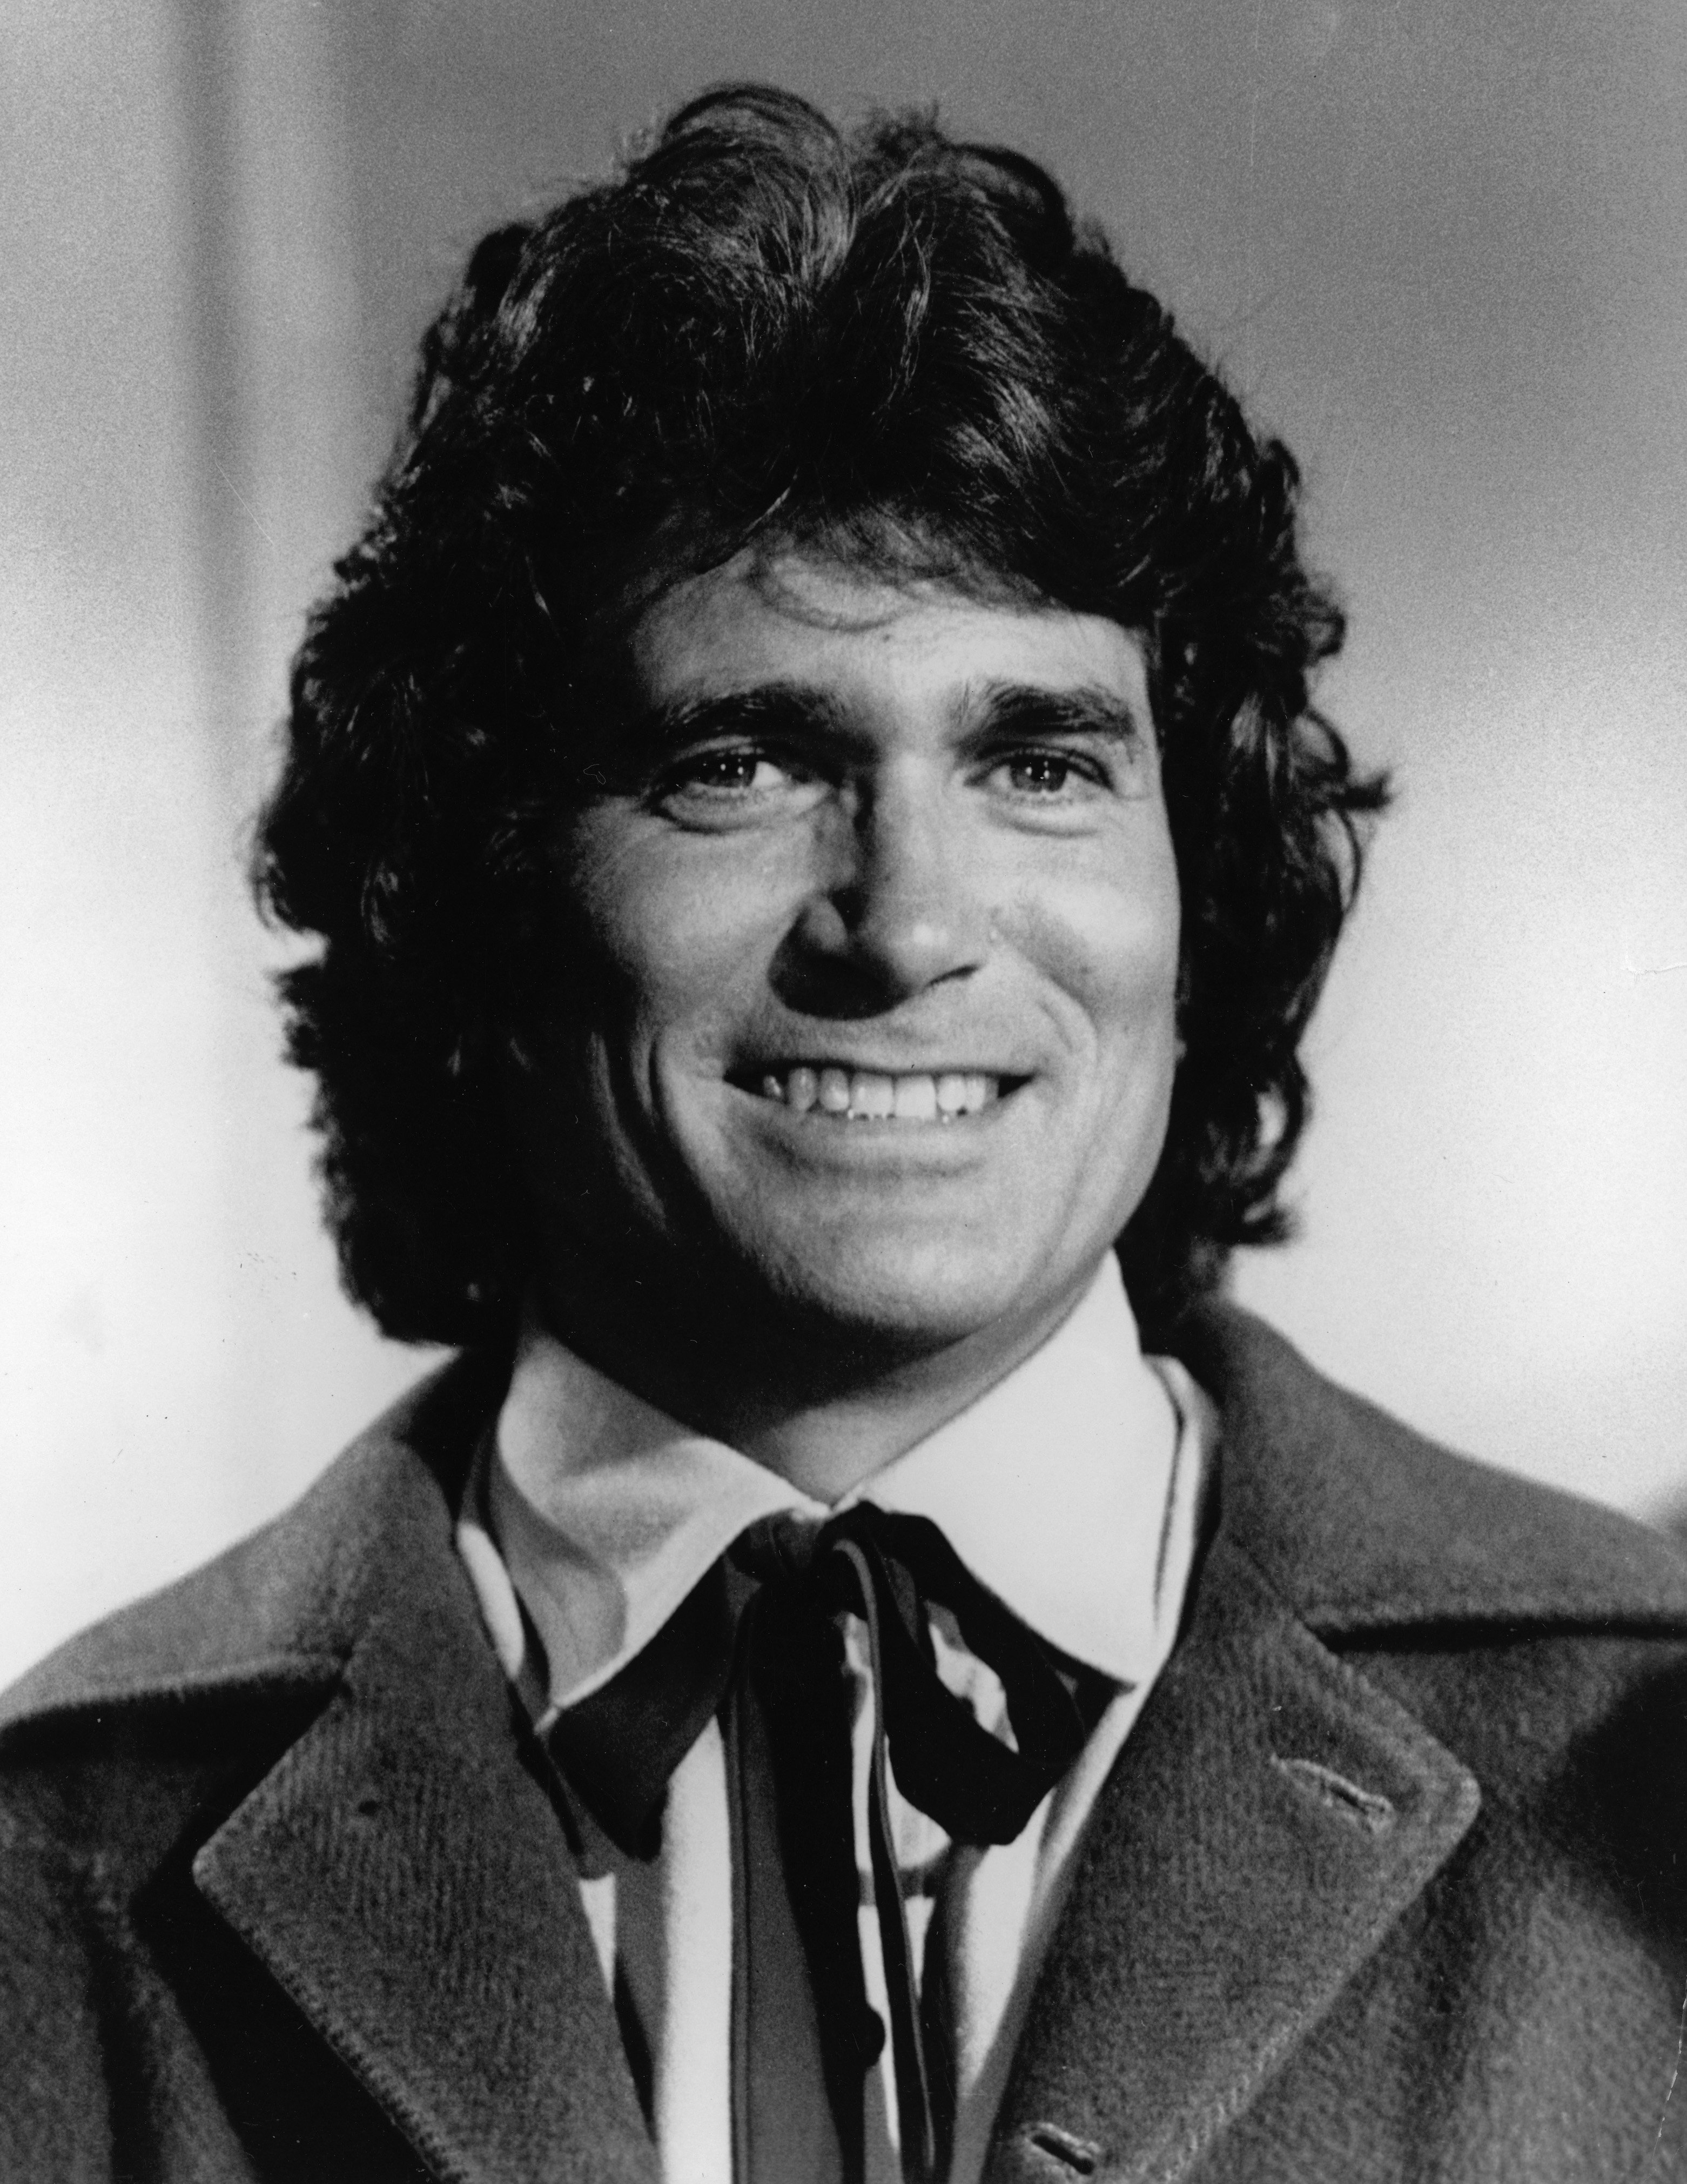 Michael Landon smiling in costume of "The Little House on the Prairie" | Photo: Getty images